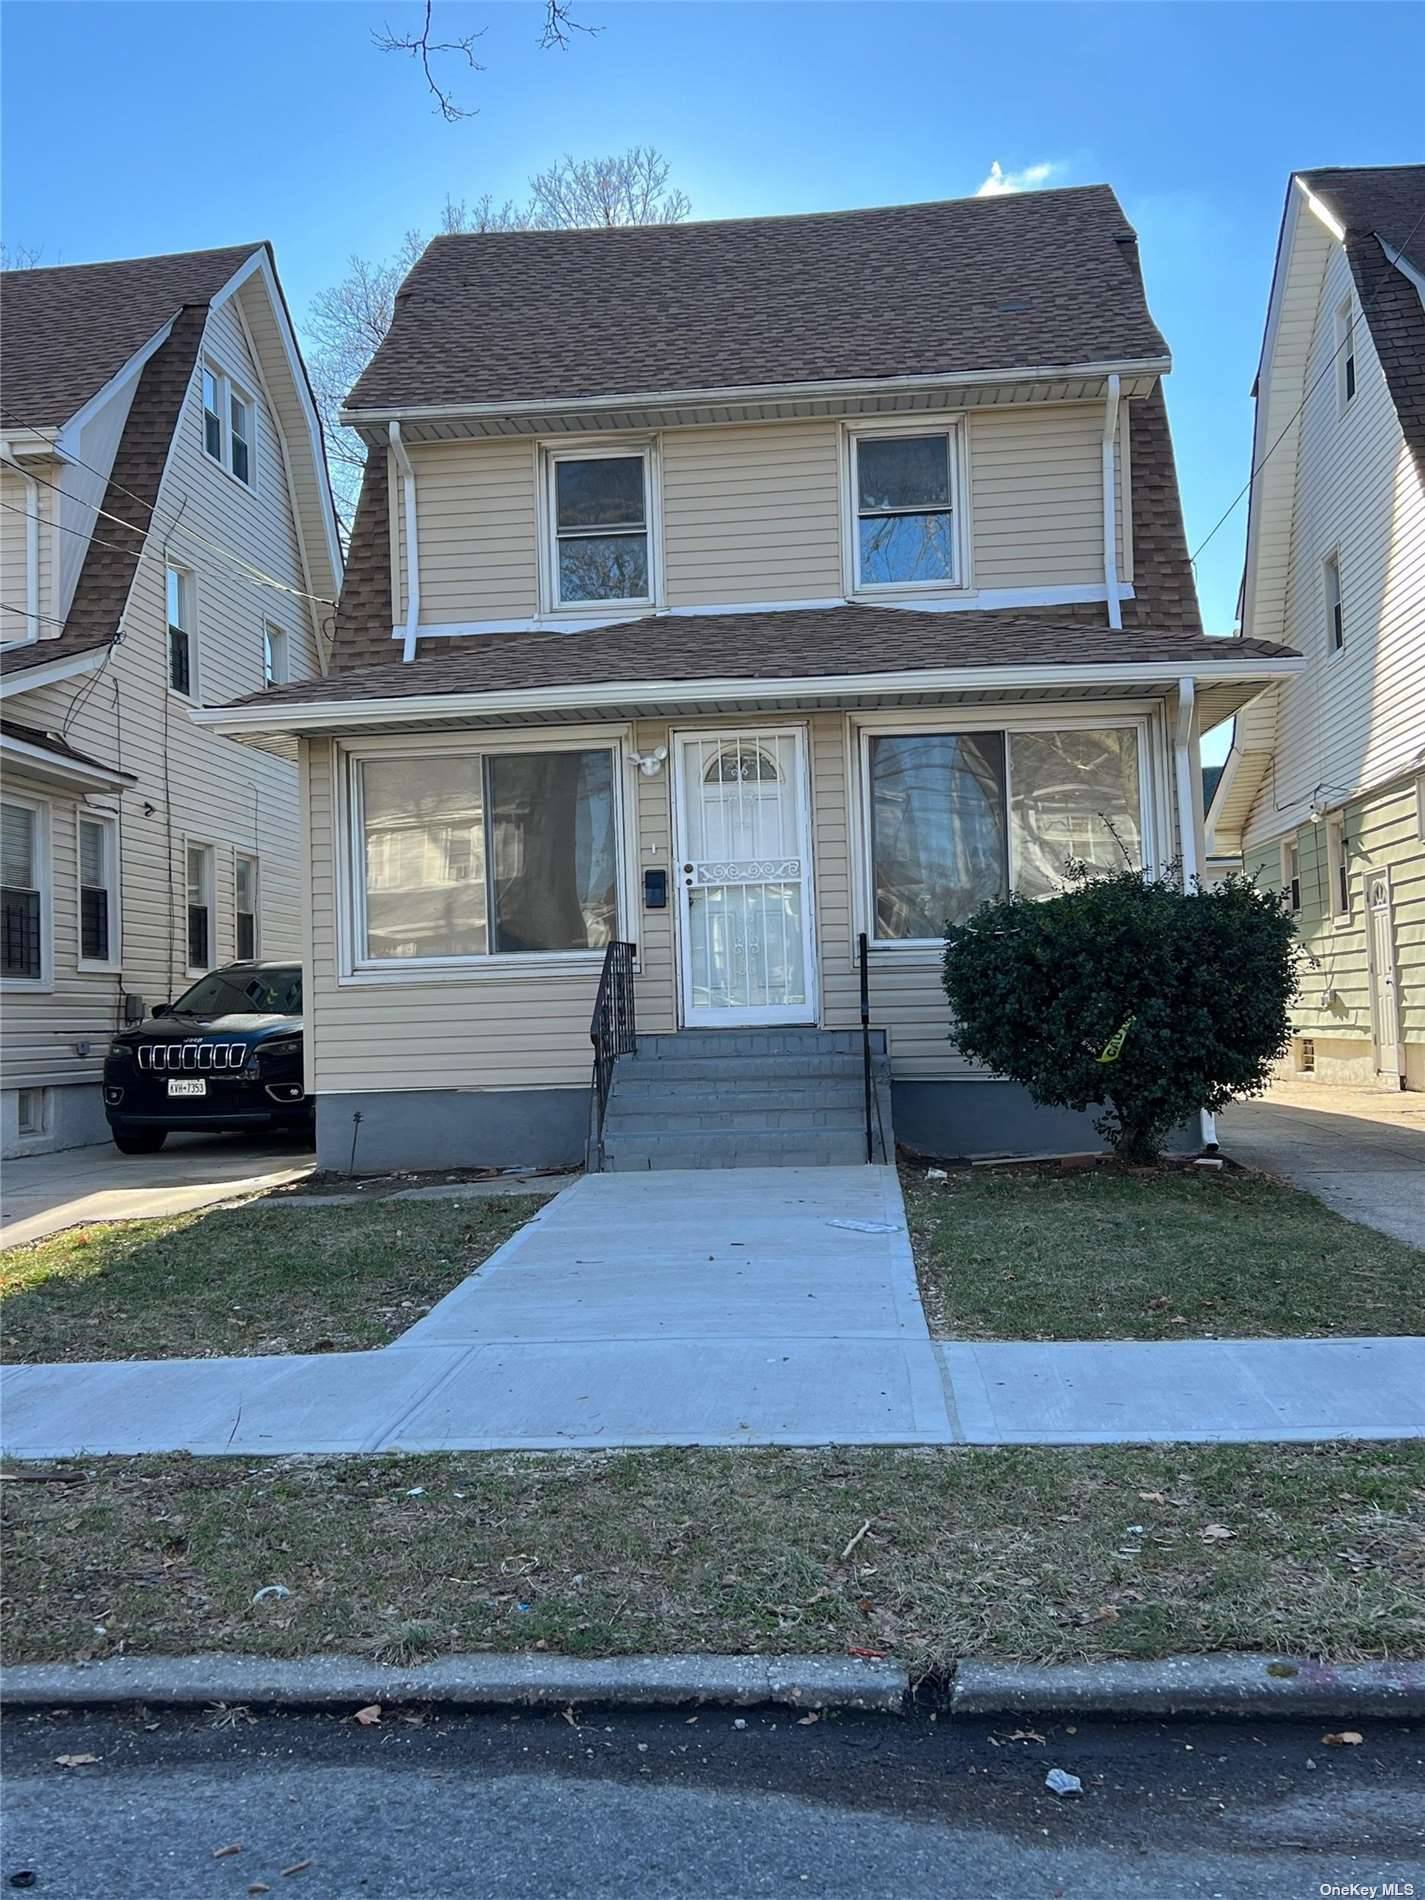 Detached, newly renovated, 6 bedroom, 4 bathroom, hardwood floor, big living room, finished basement with bathroom black marble on the floor and separate exit, New white cabinets, and white granite ...